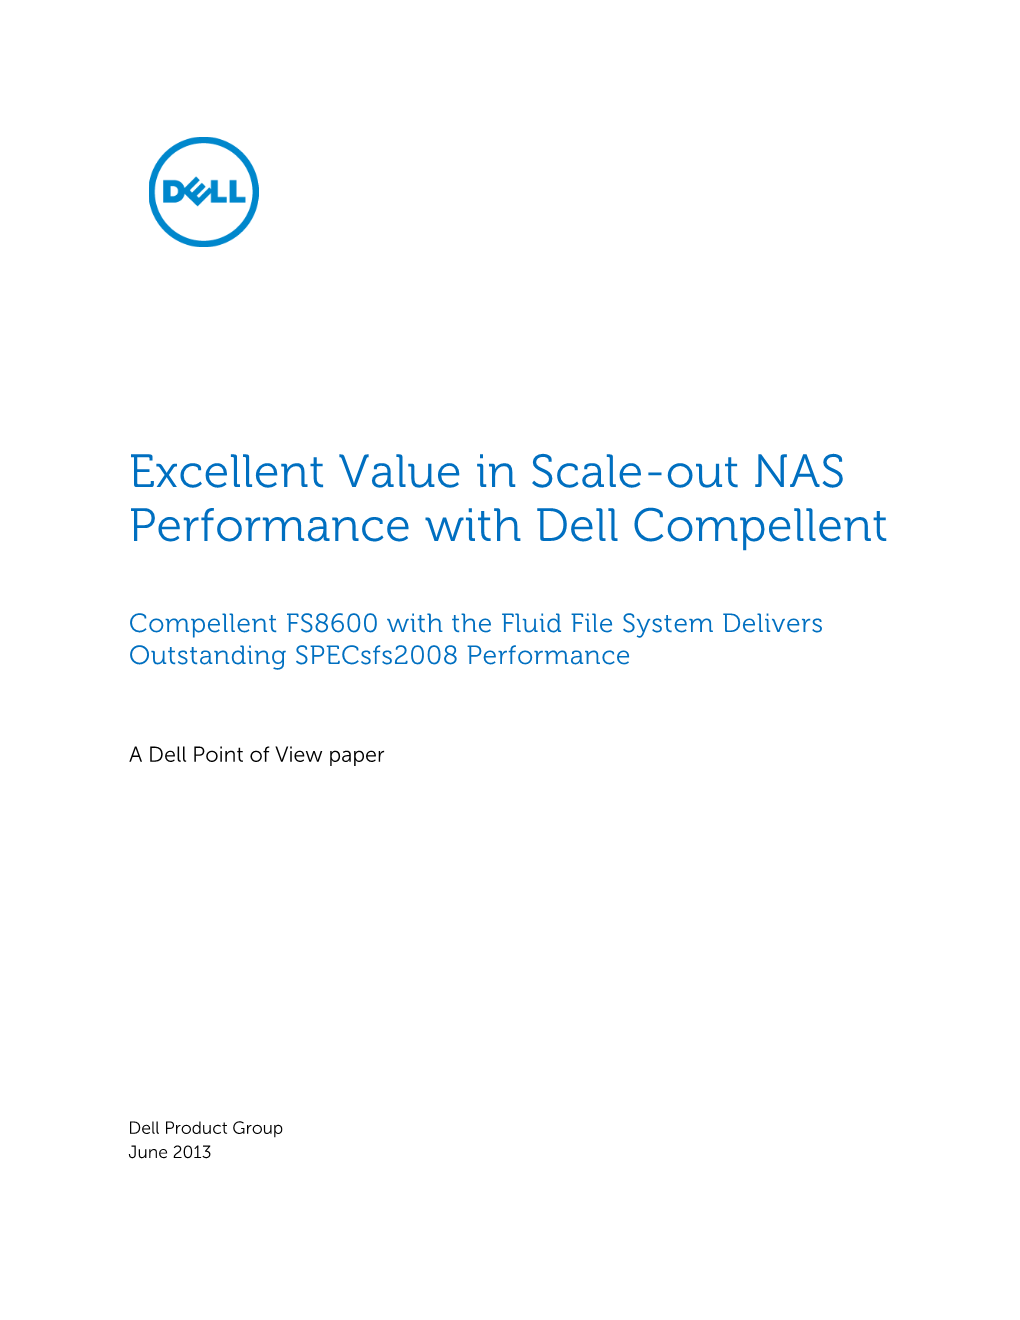 Excellent Value in Scale-Out NAS Performance with Dell Compellent